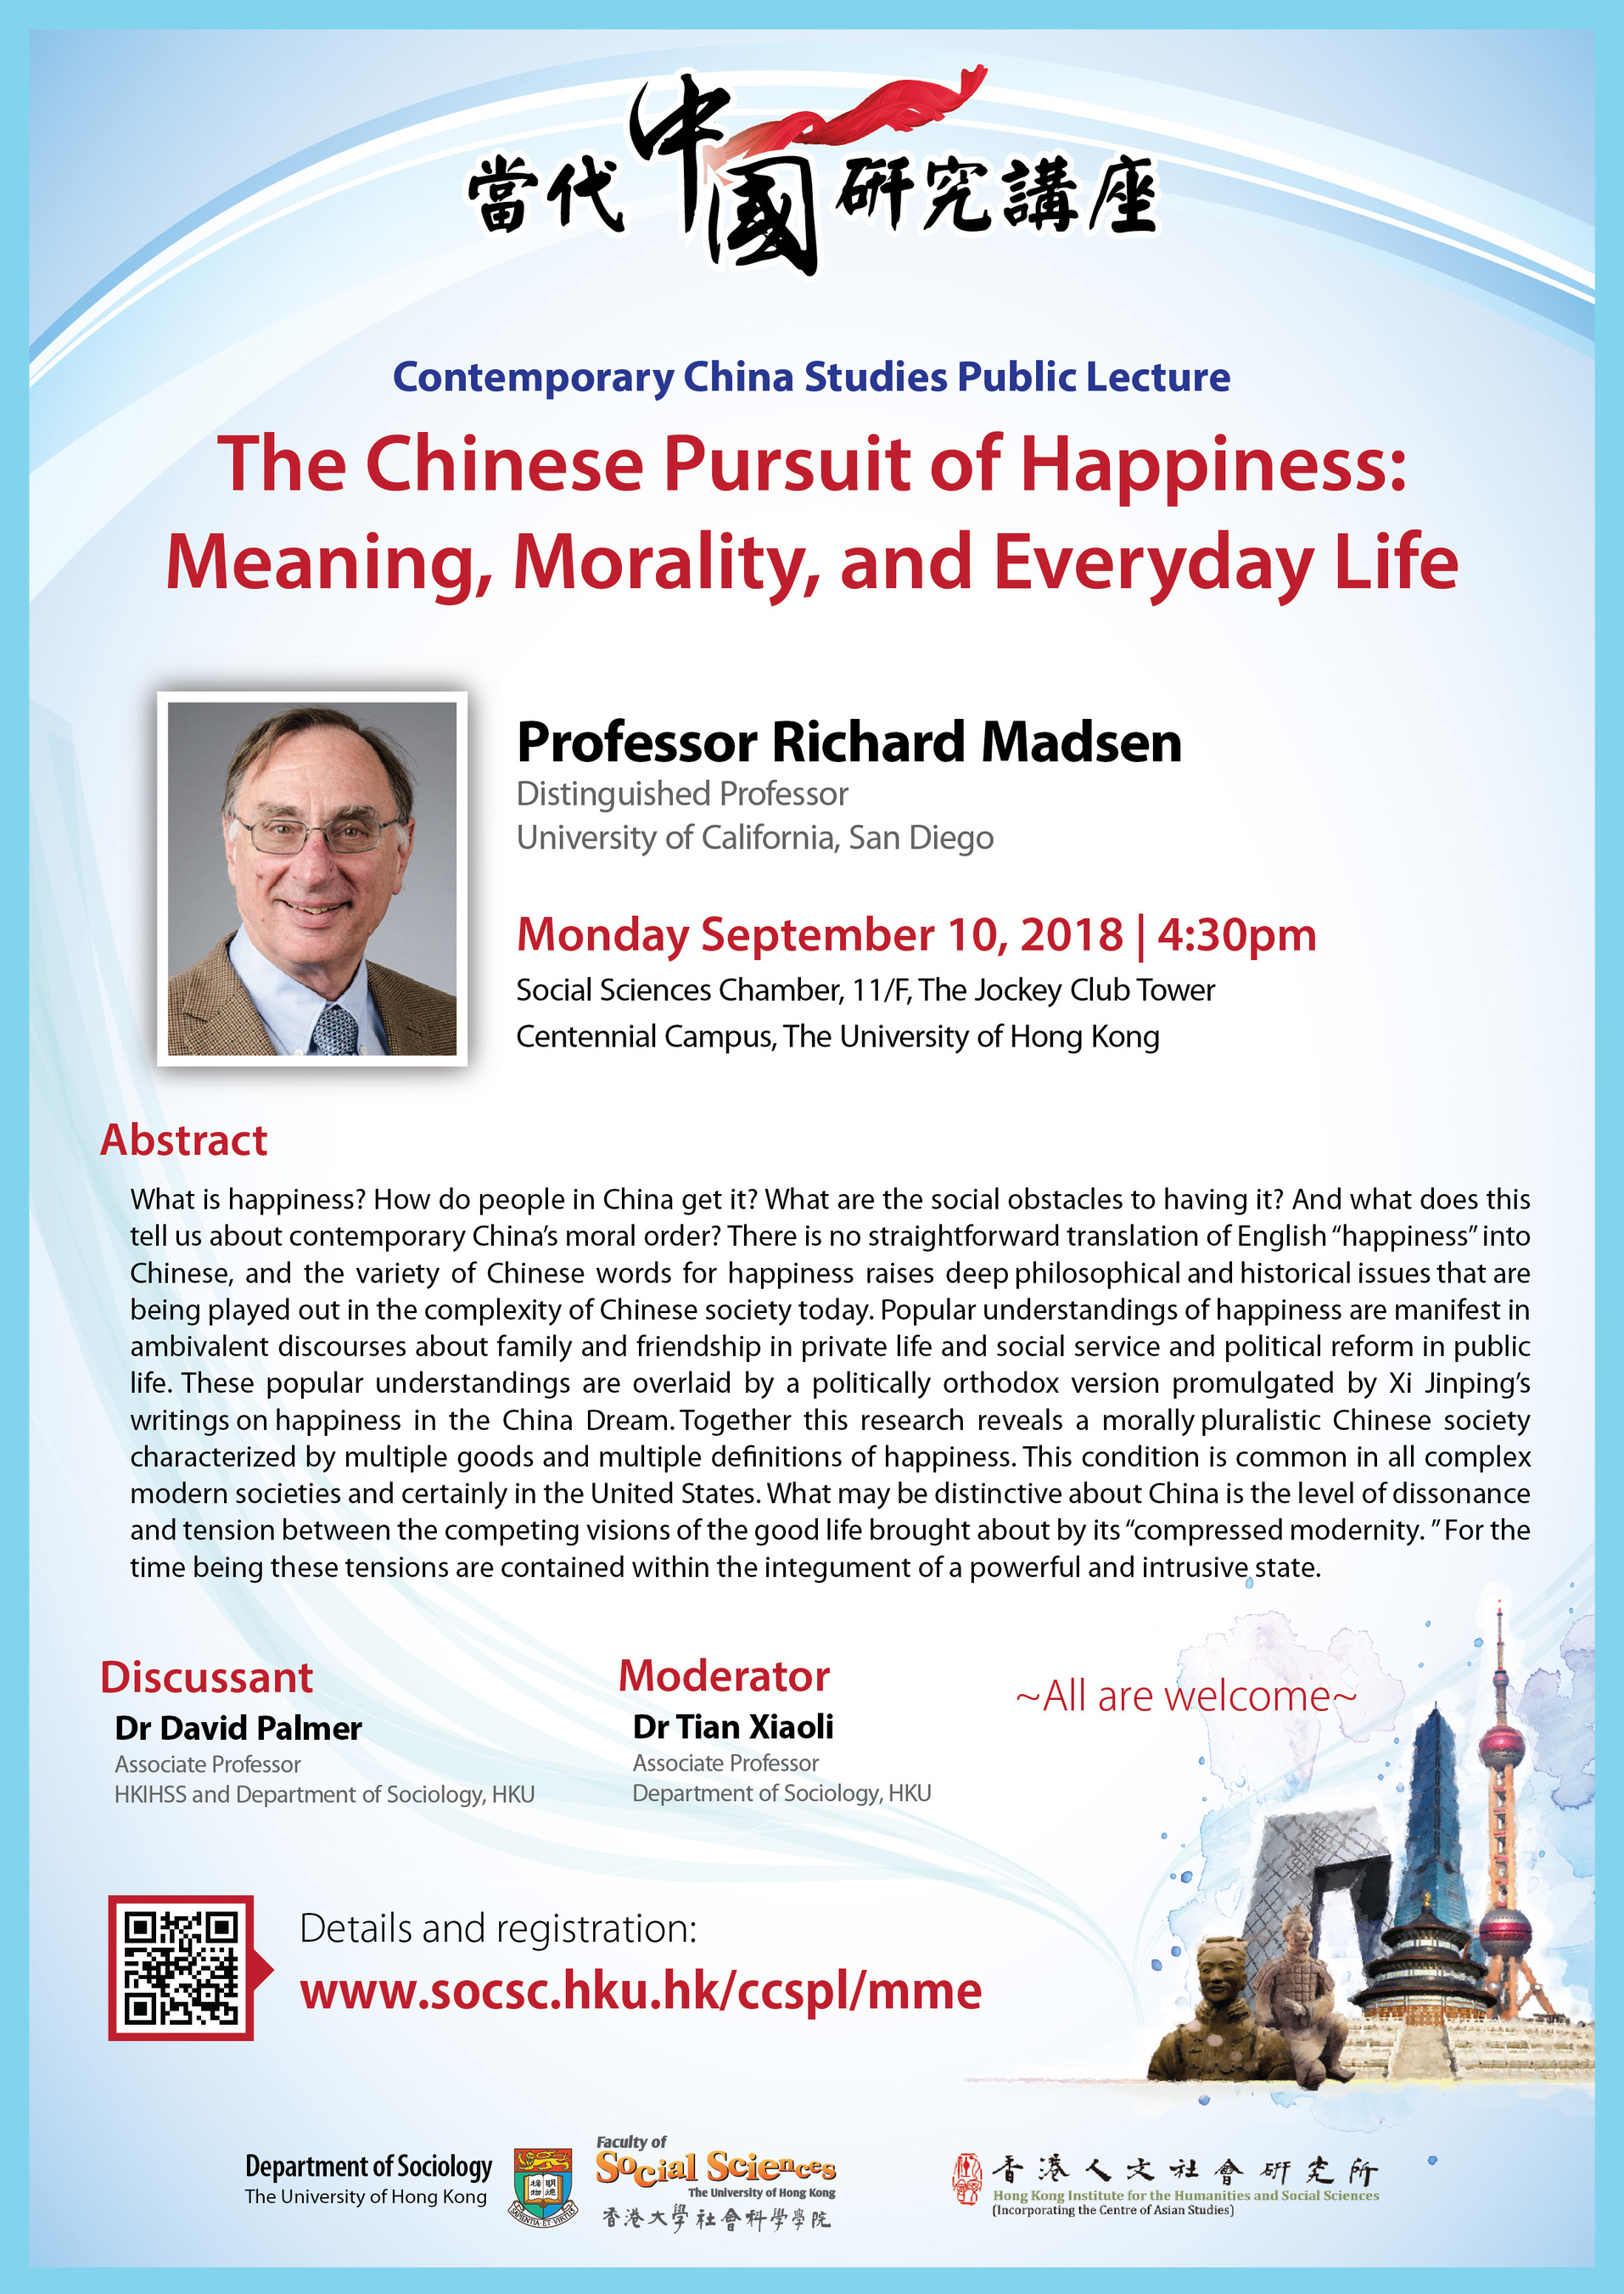 The Chinese Pursuit of Happiness: Meaning, Morality, and Everyday Life